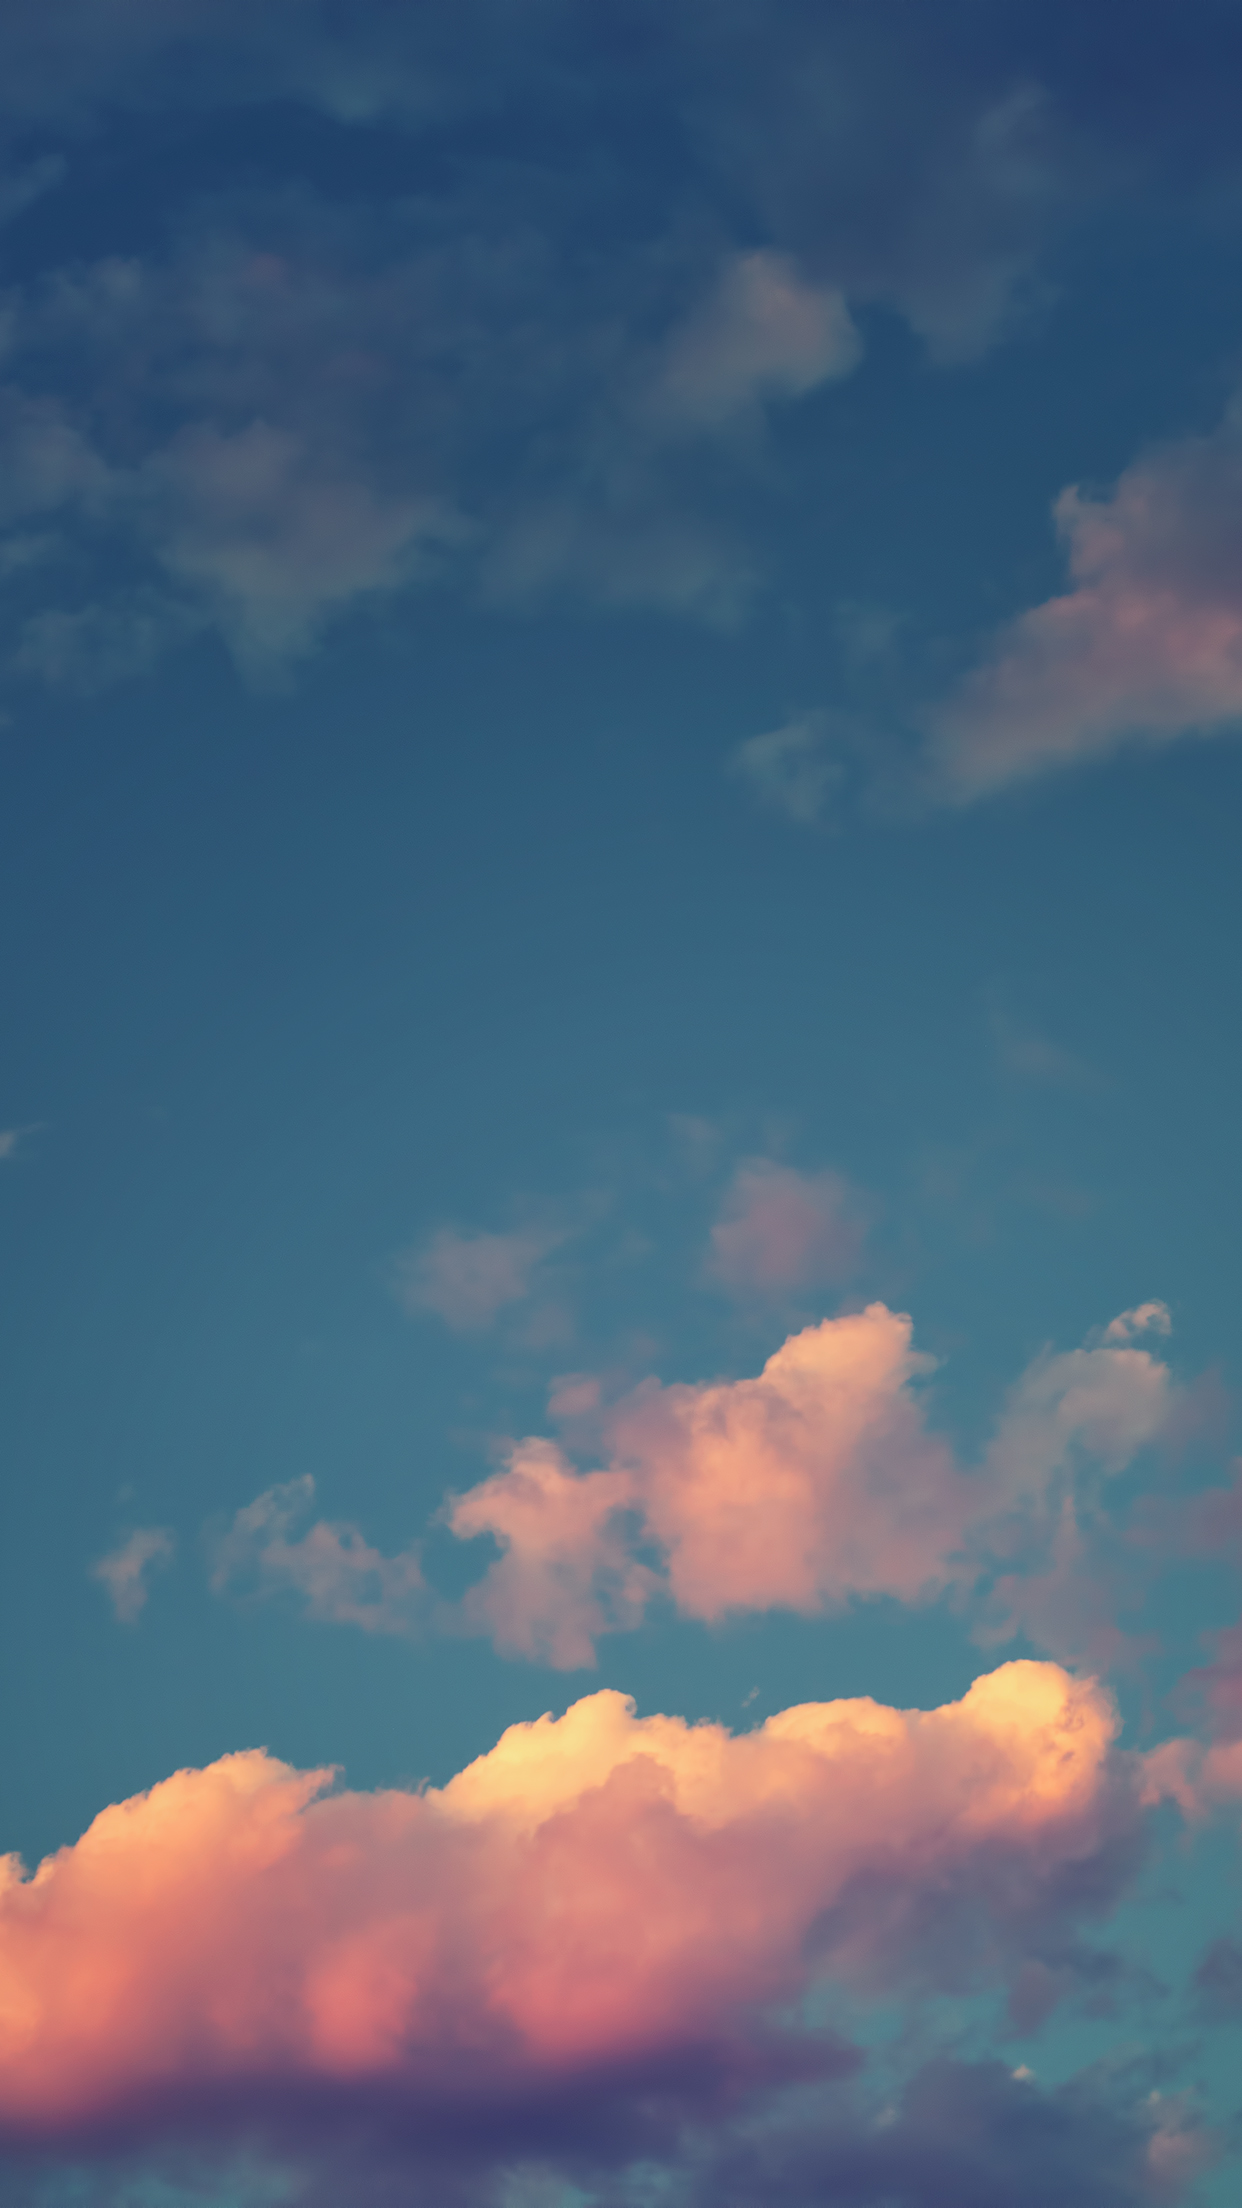 Awesome cloud iphone wallpaper for who live in cloud Cuckoo Land  Idea  Wallpapers  iPhone WallpapersColor Schemes